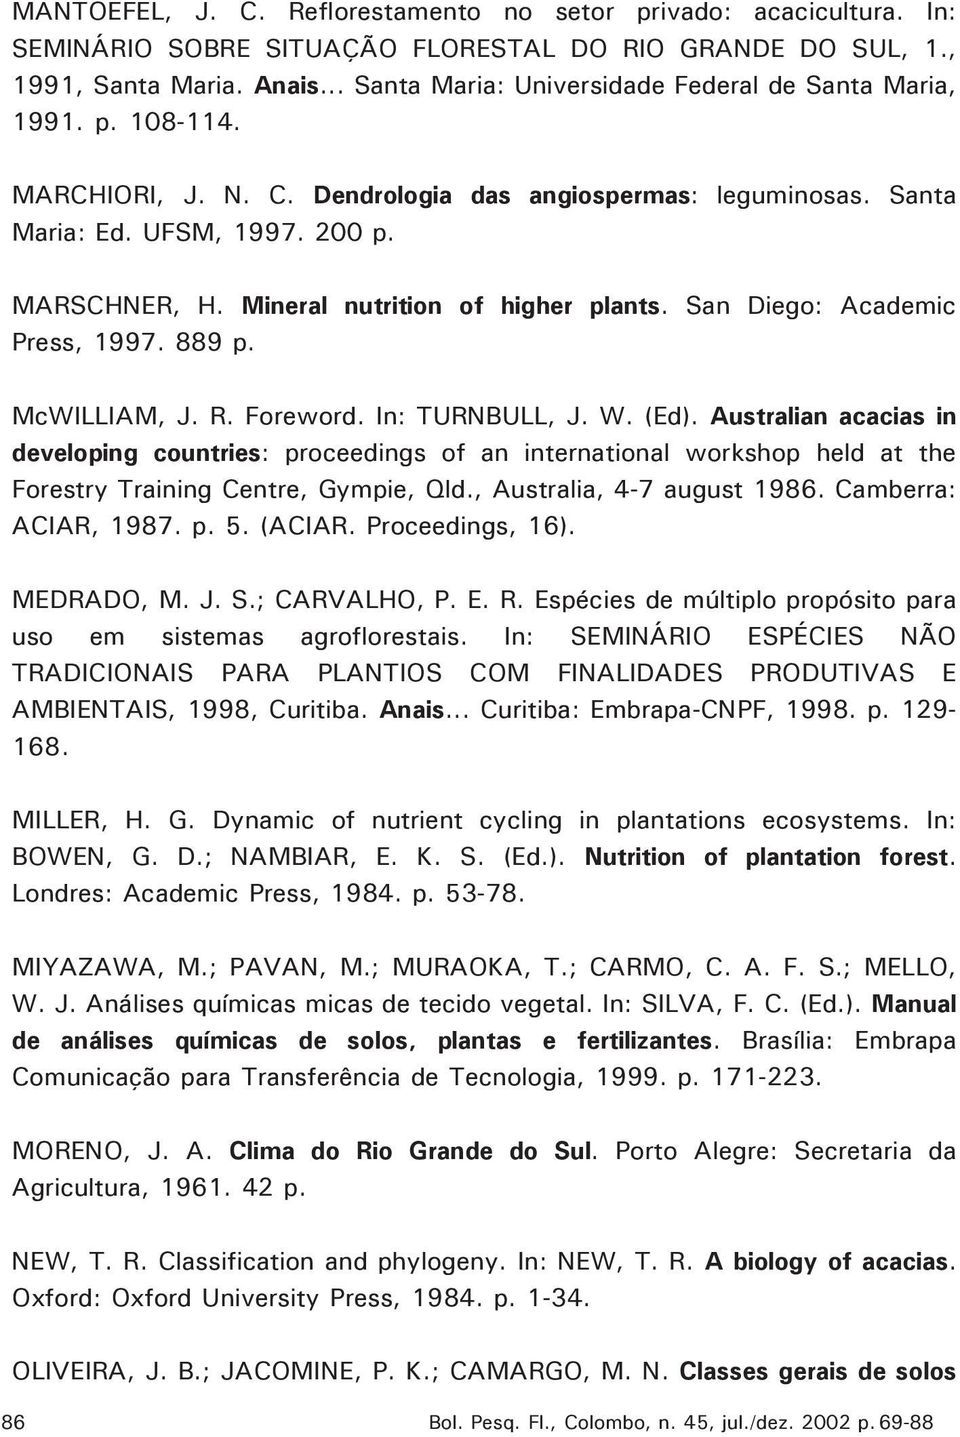 Mineral nutrition of higher plants. San Diego: Academic Press, 1997. 889 p. McWILLIAM, J. R. Foreword. In: TURNBULL, J. W. (Ed).